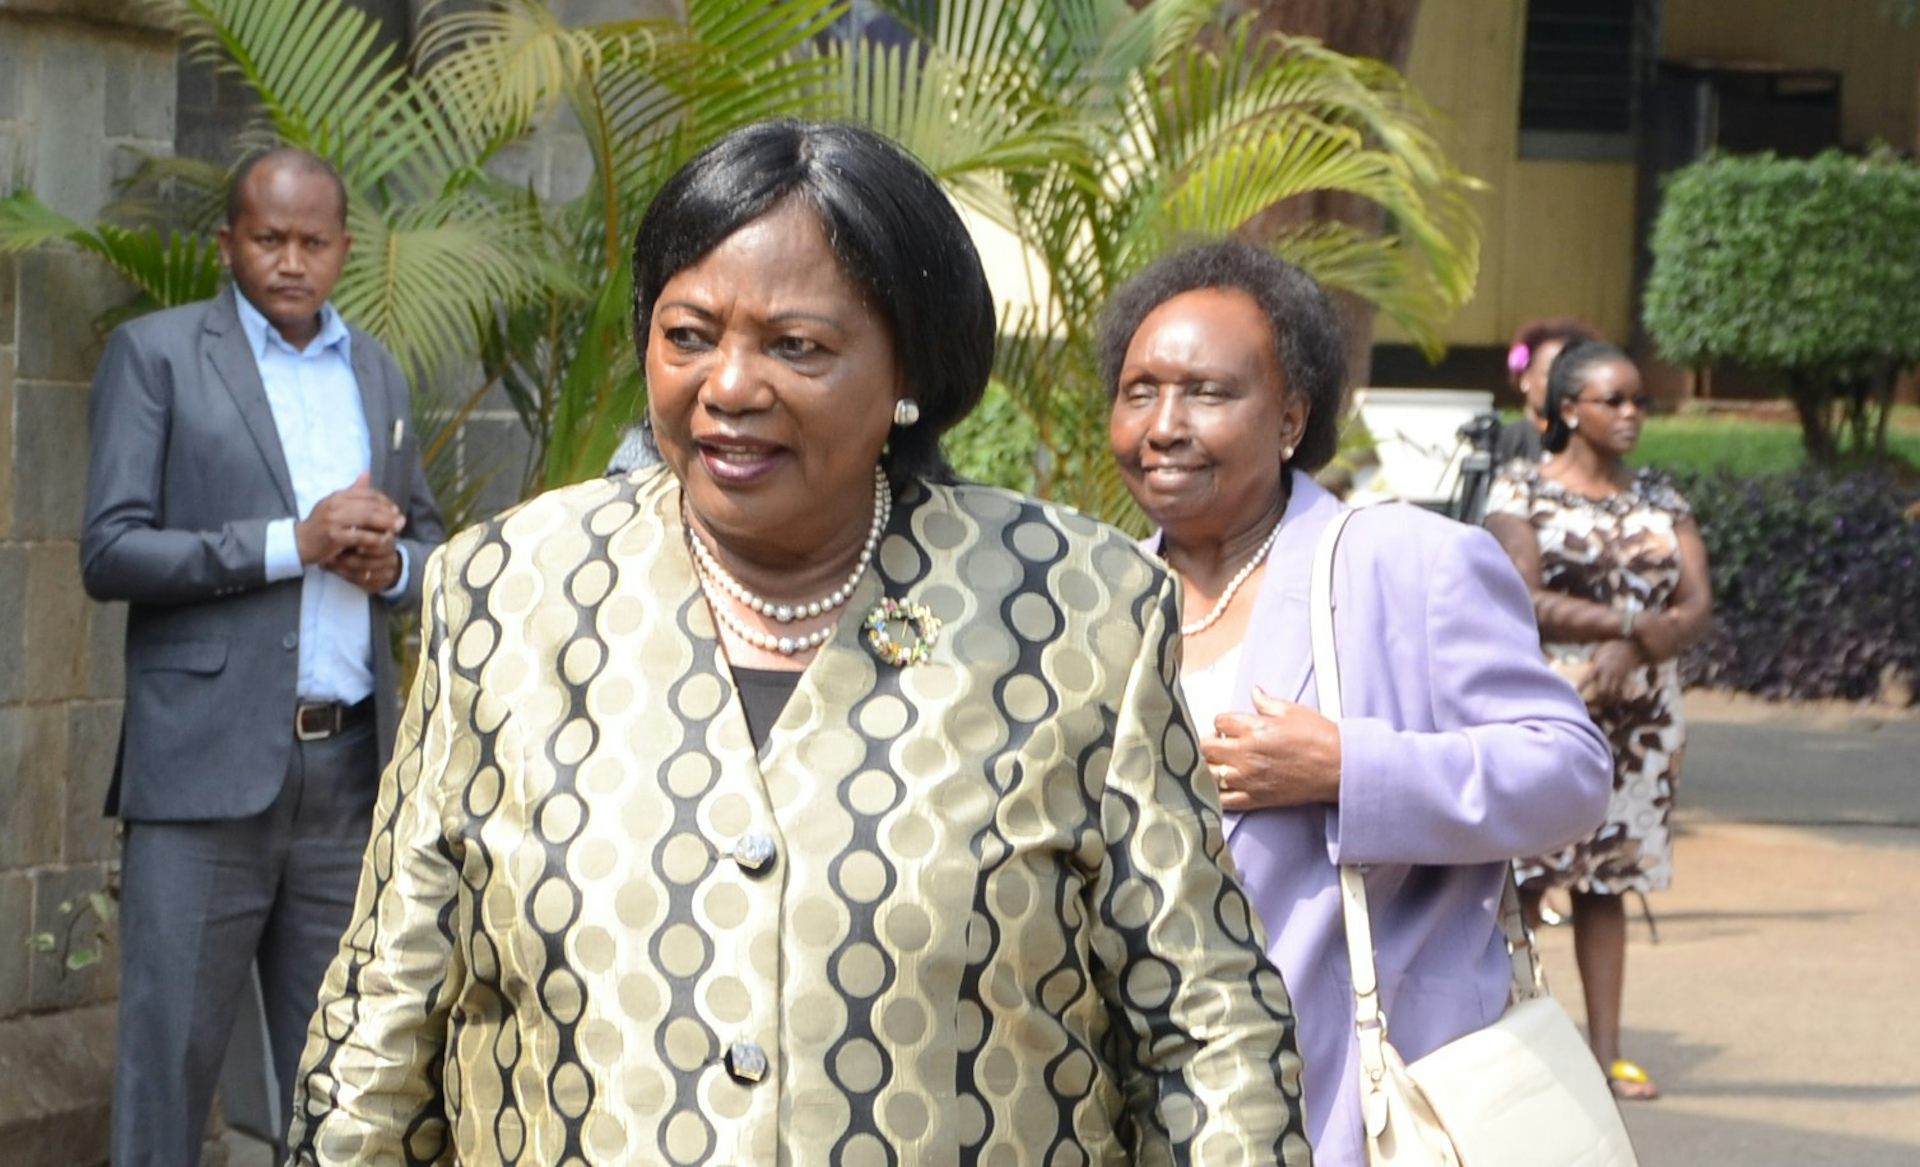 An image of Mama Ngina Kenyatta, with some people in the background